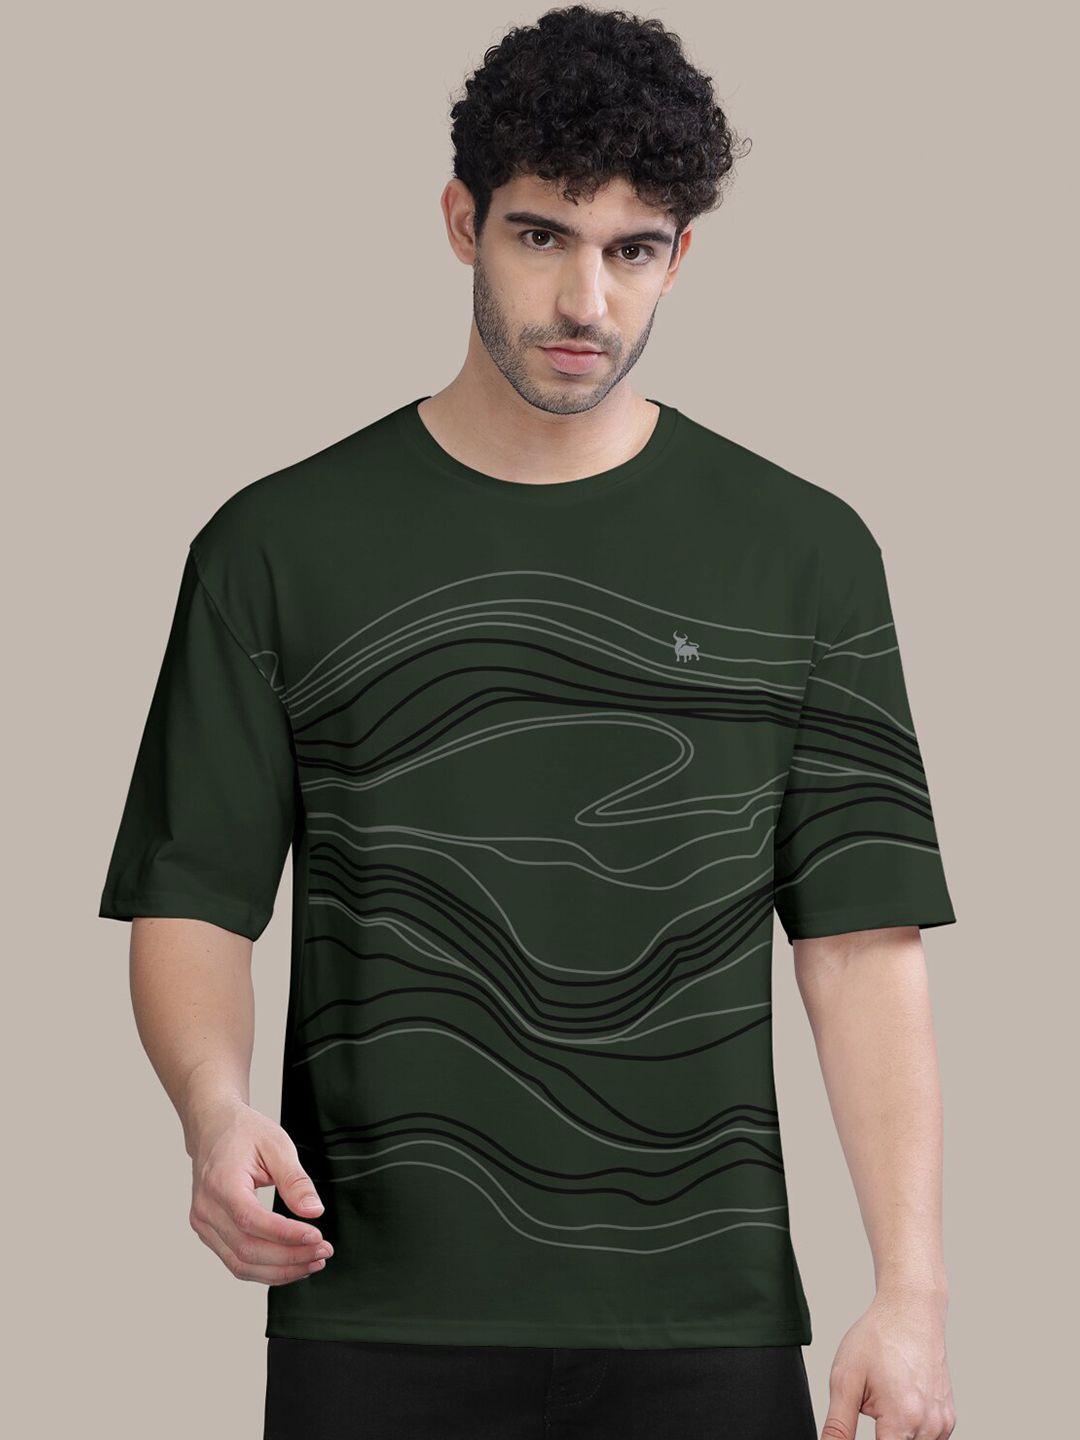 bullmer abstract printed oversized cotton t-shirt